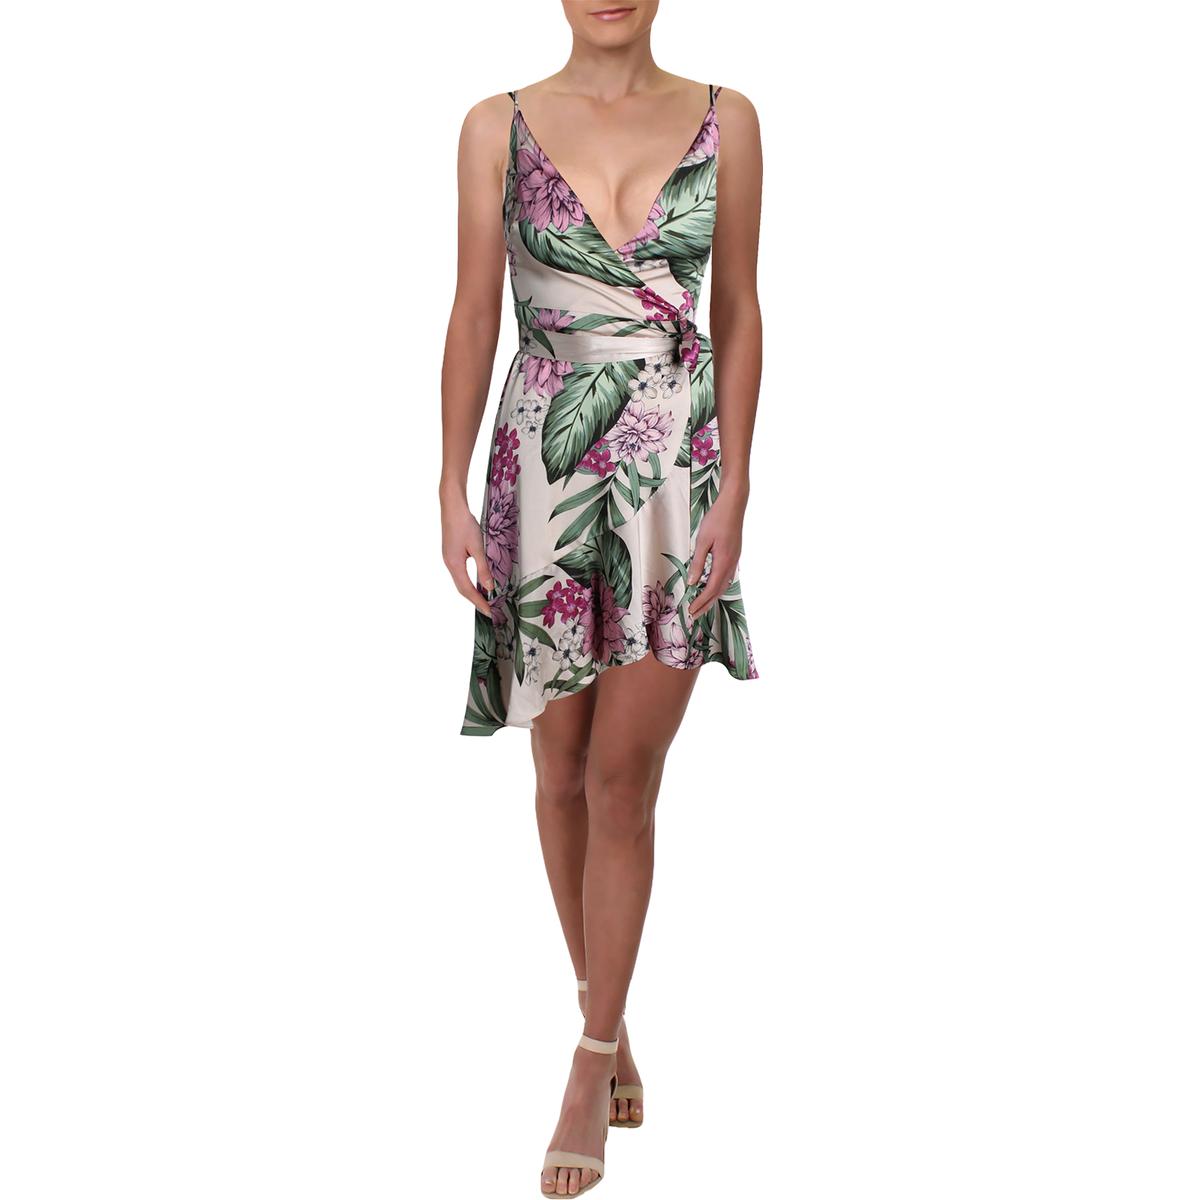 marciano floral dress